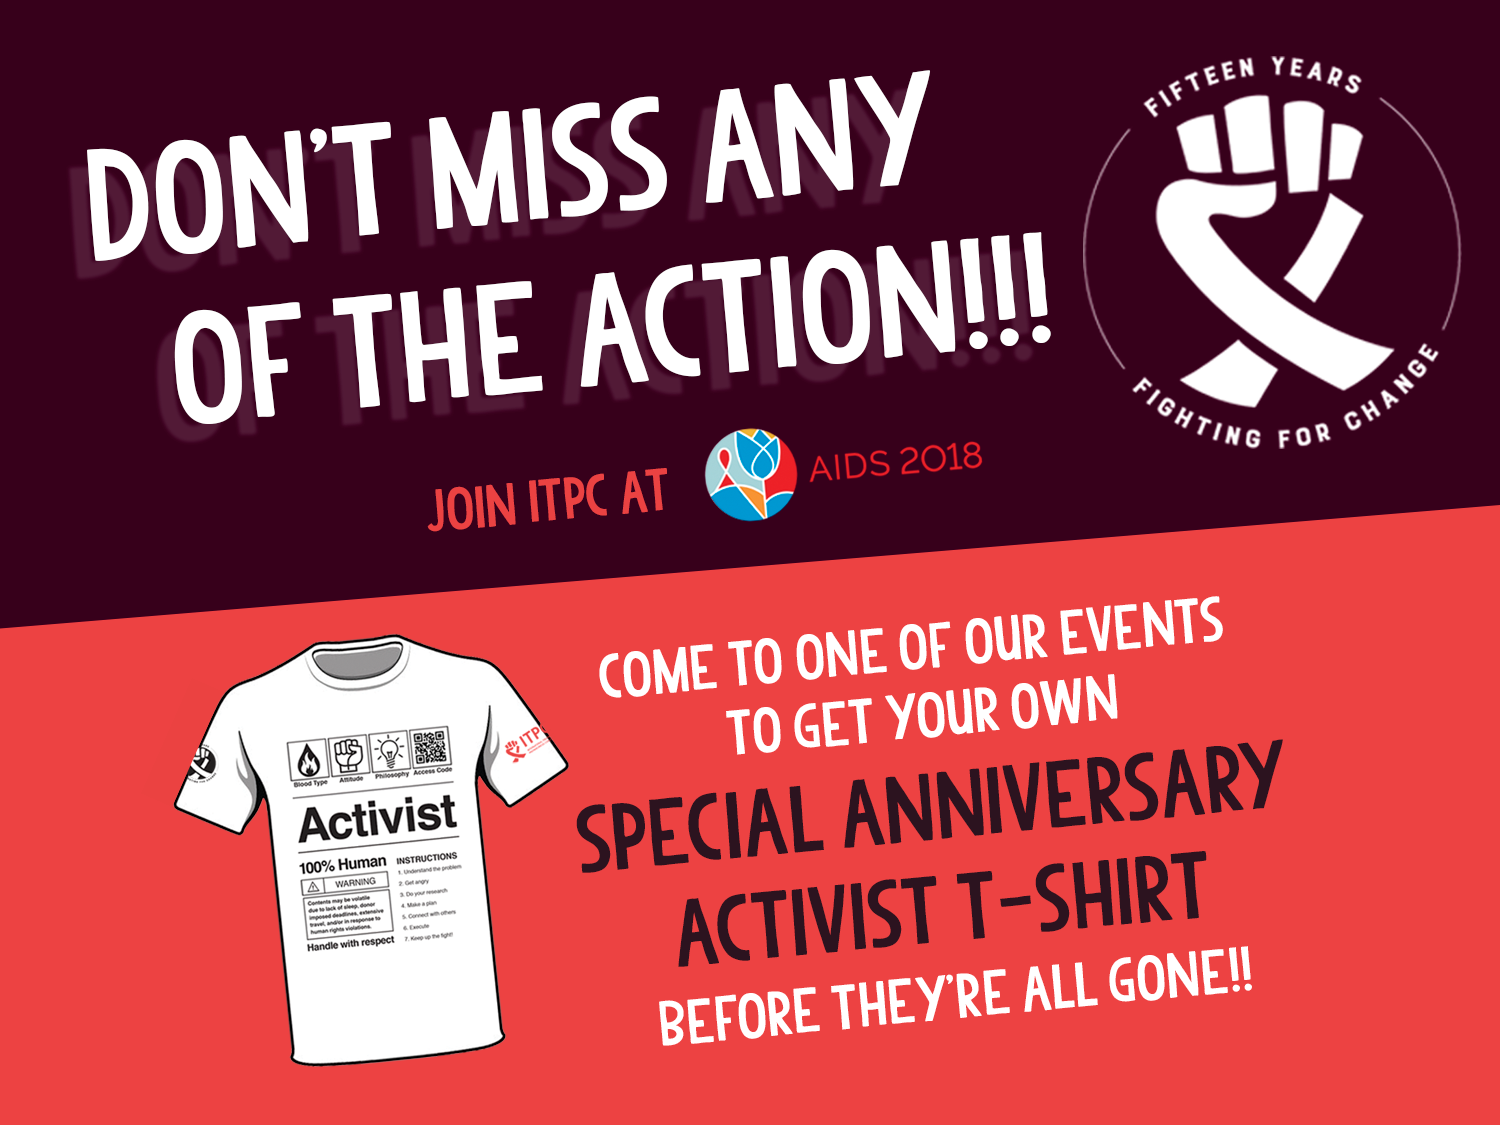 Join ITPC at AIDS 2018!